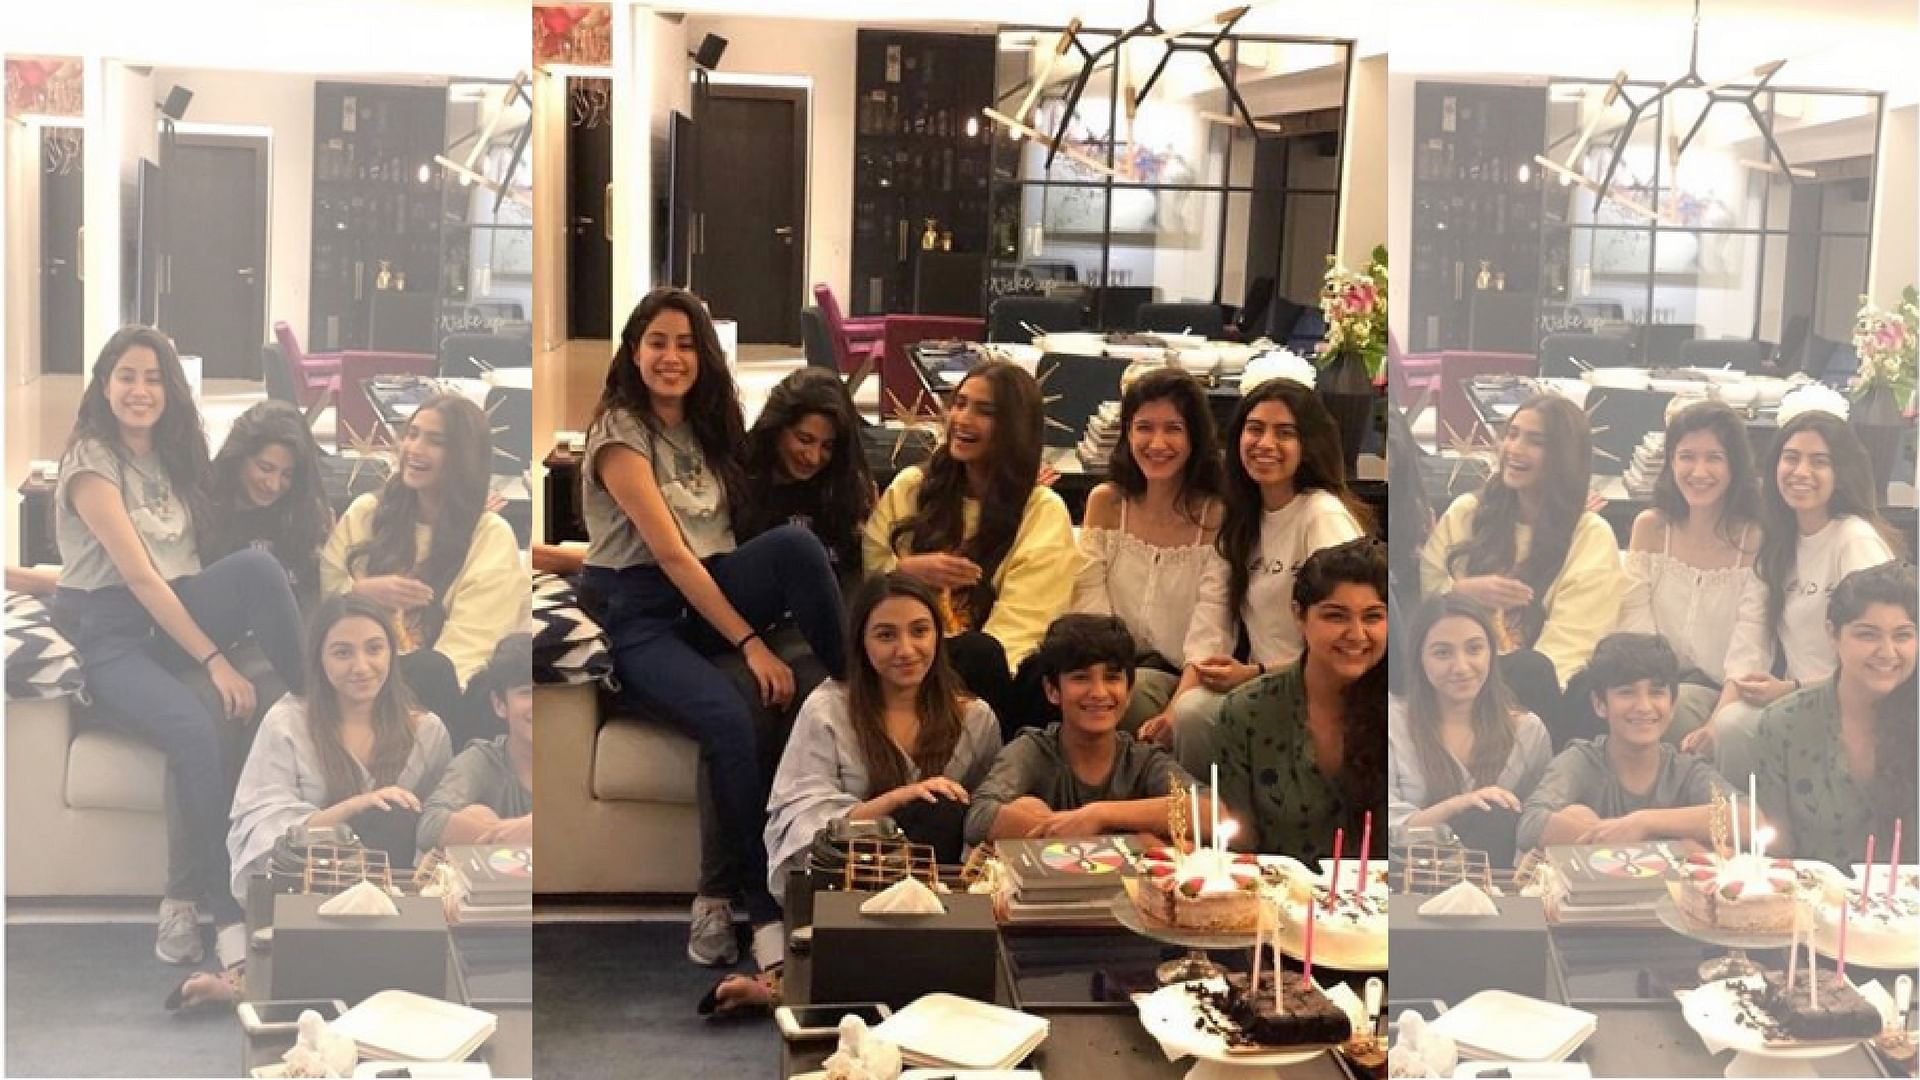 Janhvi, Rhea, Sonam, Khushi and Anshula Kapoor are seen in this picture.